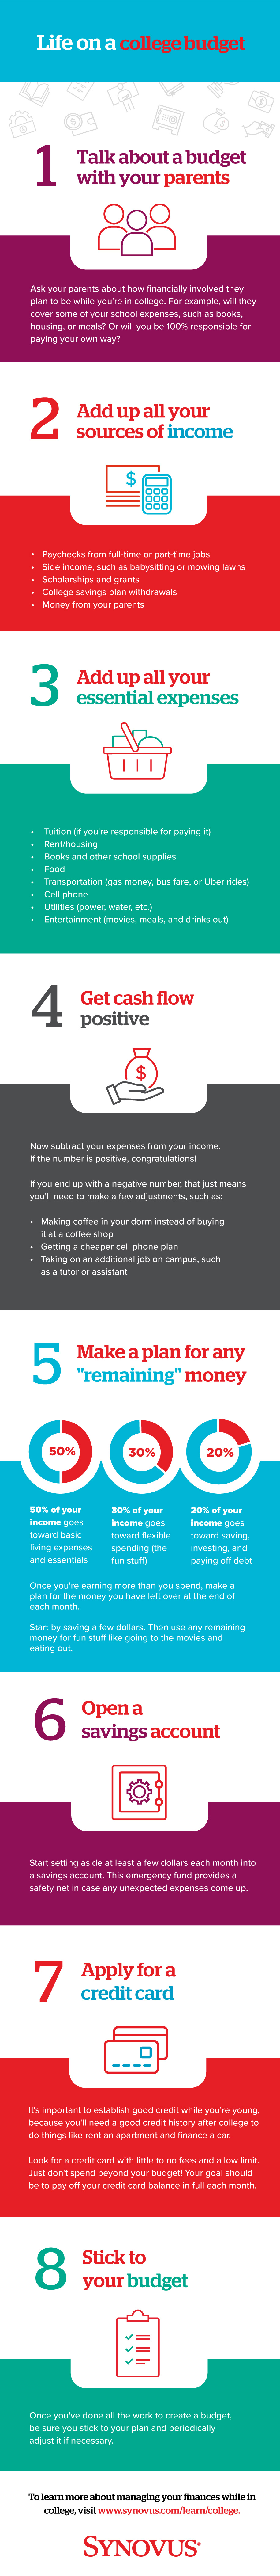 https://www.synovus.com/-/media/images/personal-resource-center/infographics/8-steps-to-manage-your-money-in-college.jpg?la=en&hash=84607D853DCD9AB53408EA4C65AD1B5D3FCC2091